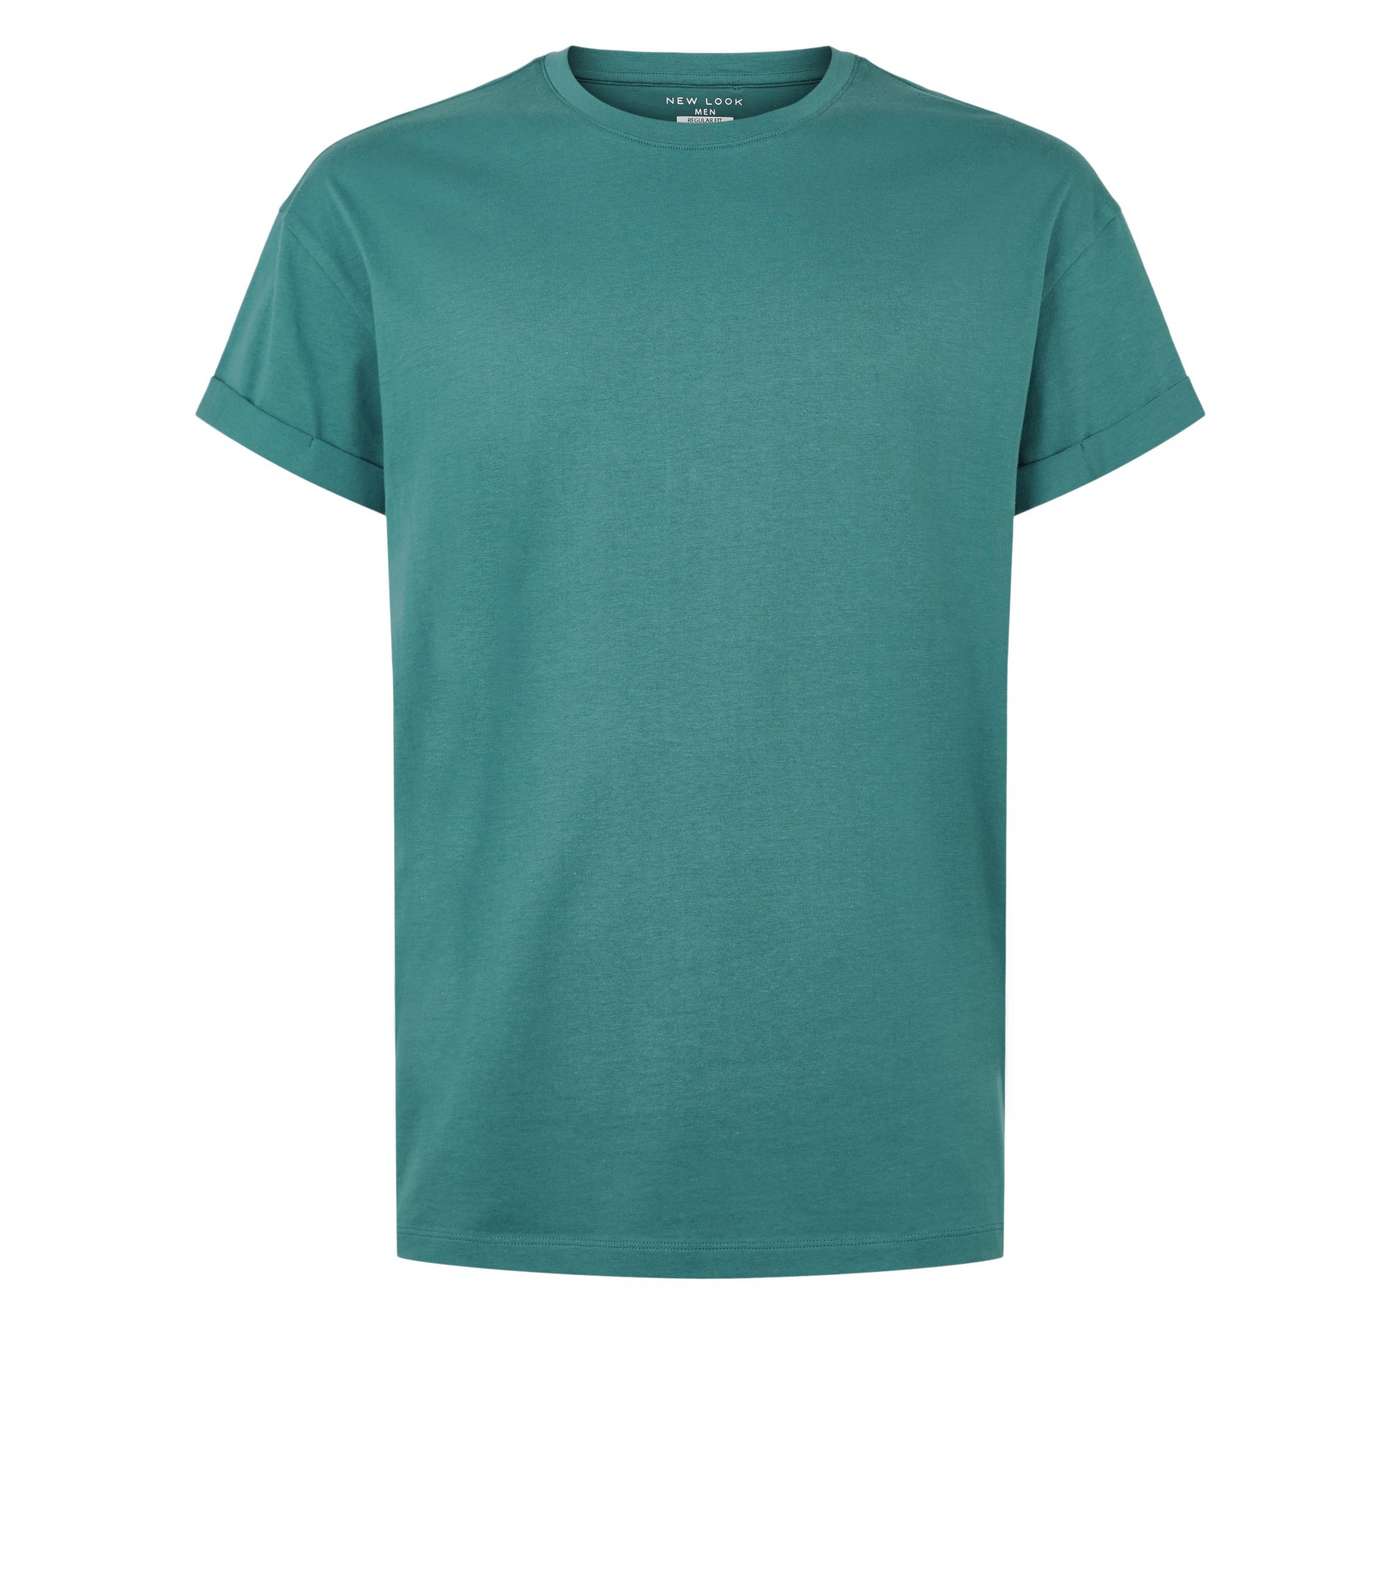 Teal Cotton Short Roll Sleeve T-Shirt Image 4